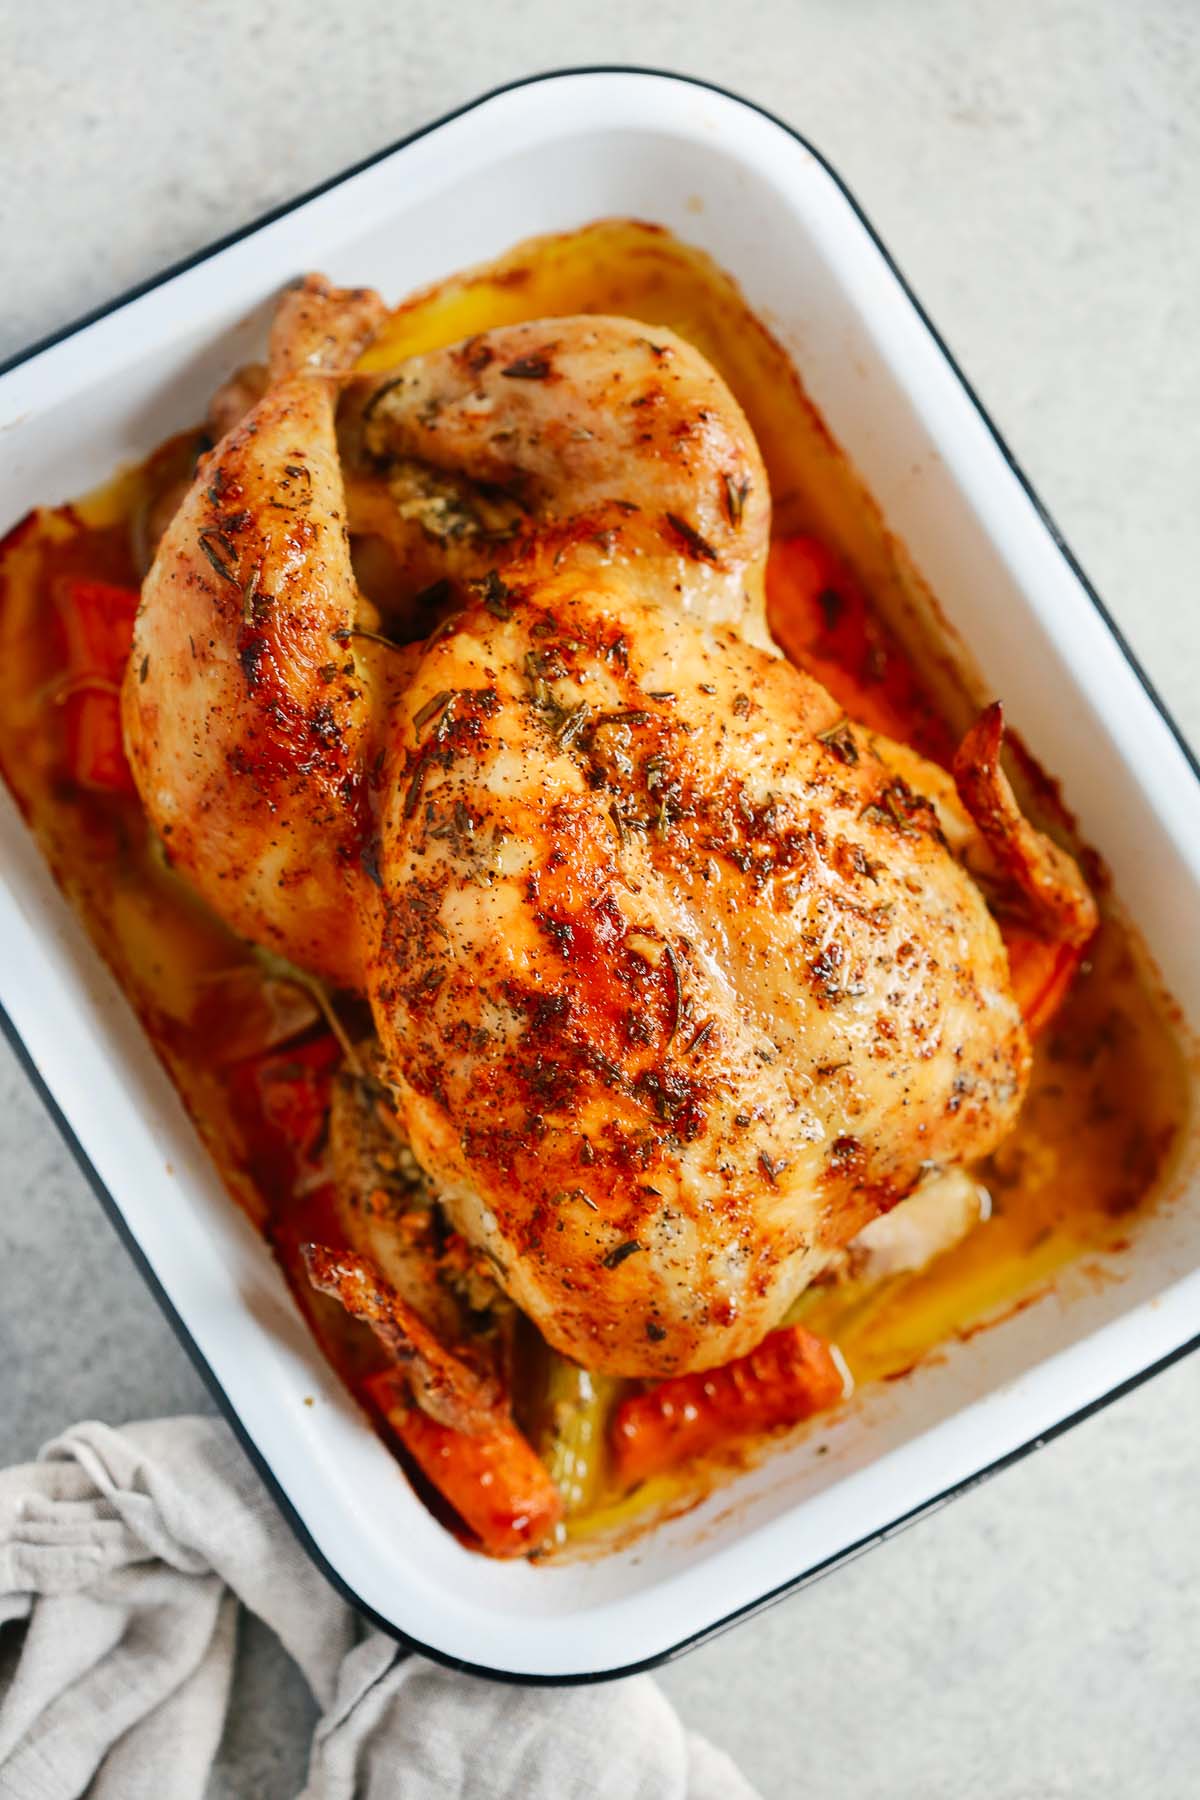 Overhead image of roasted whole chicken inside of a roasting pan